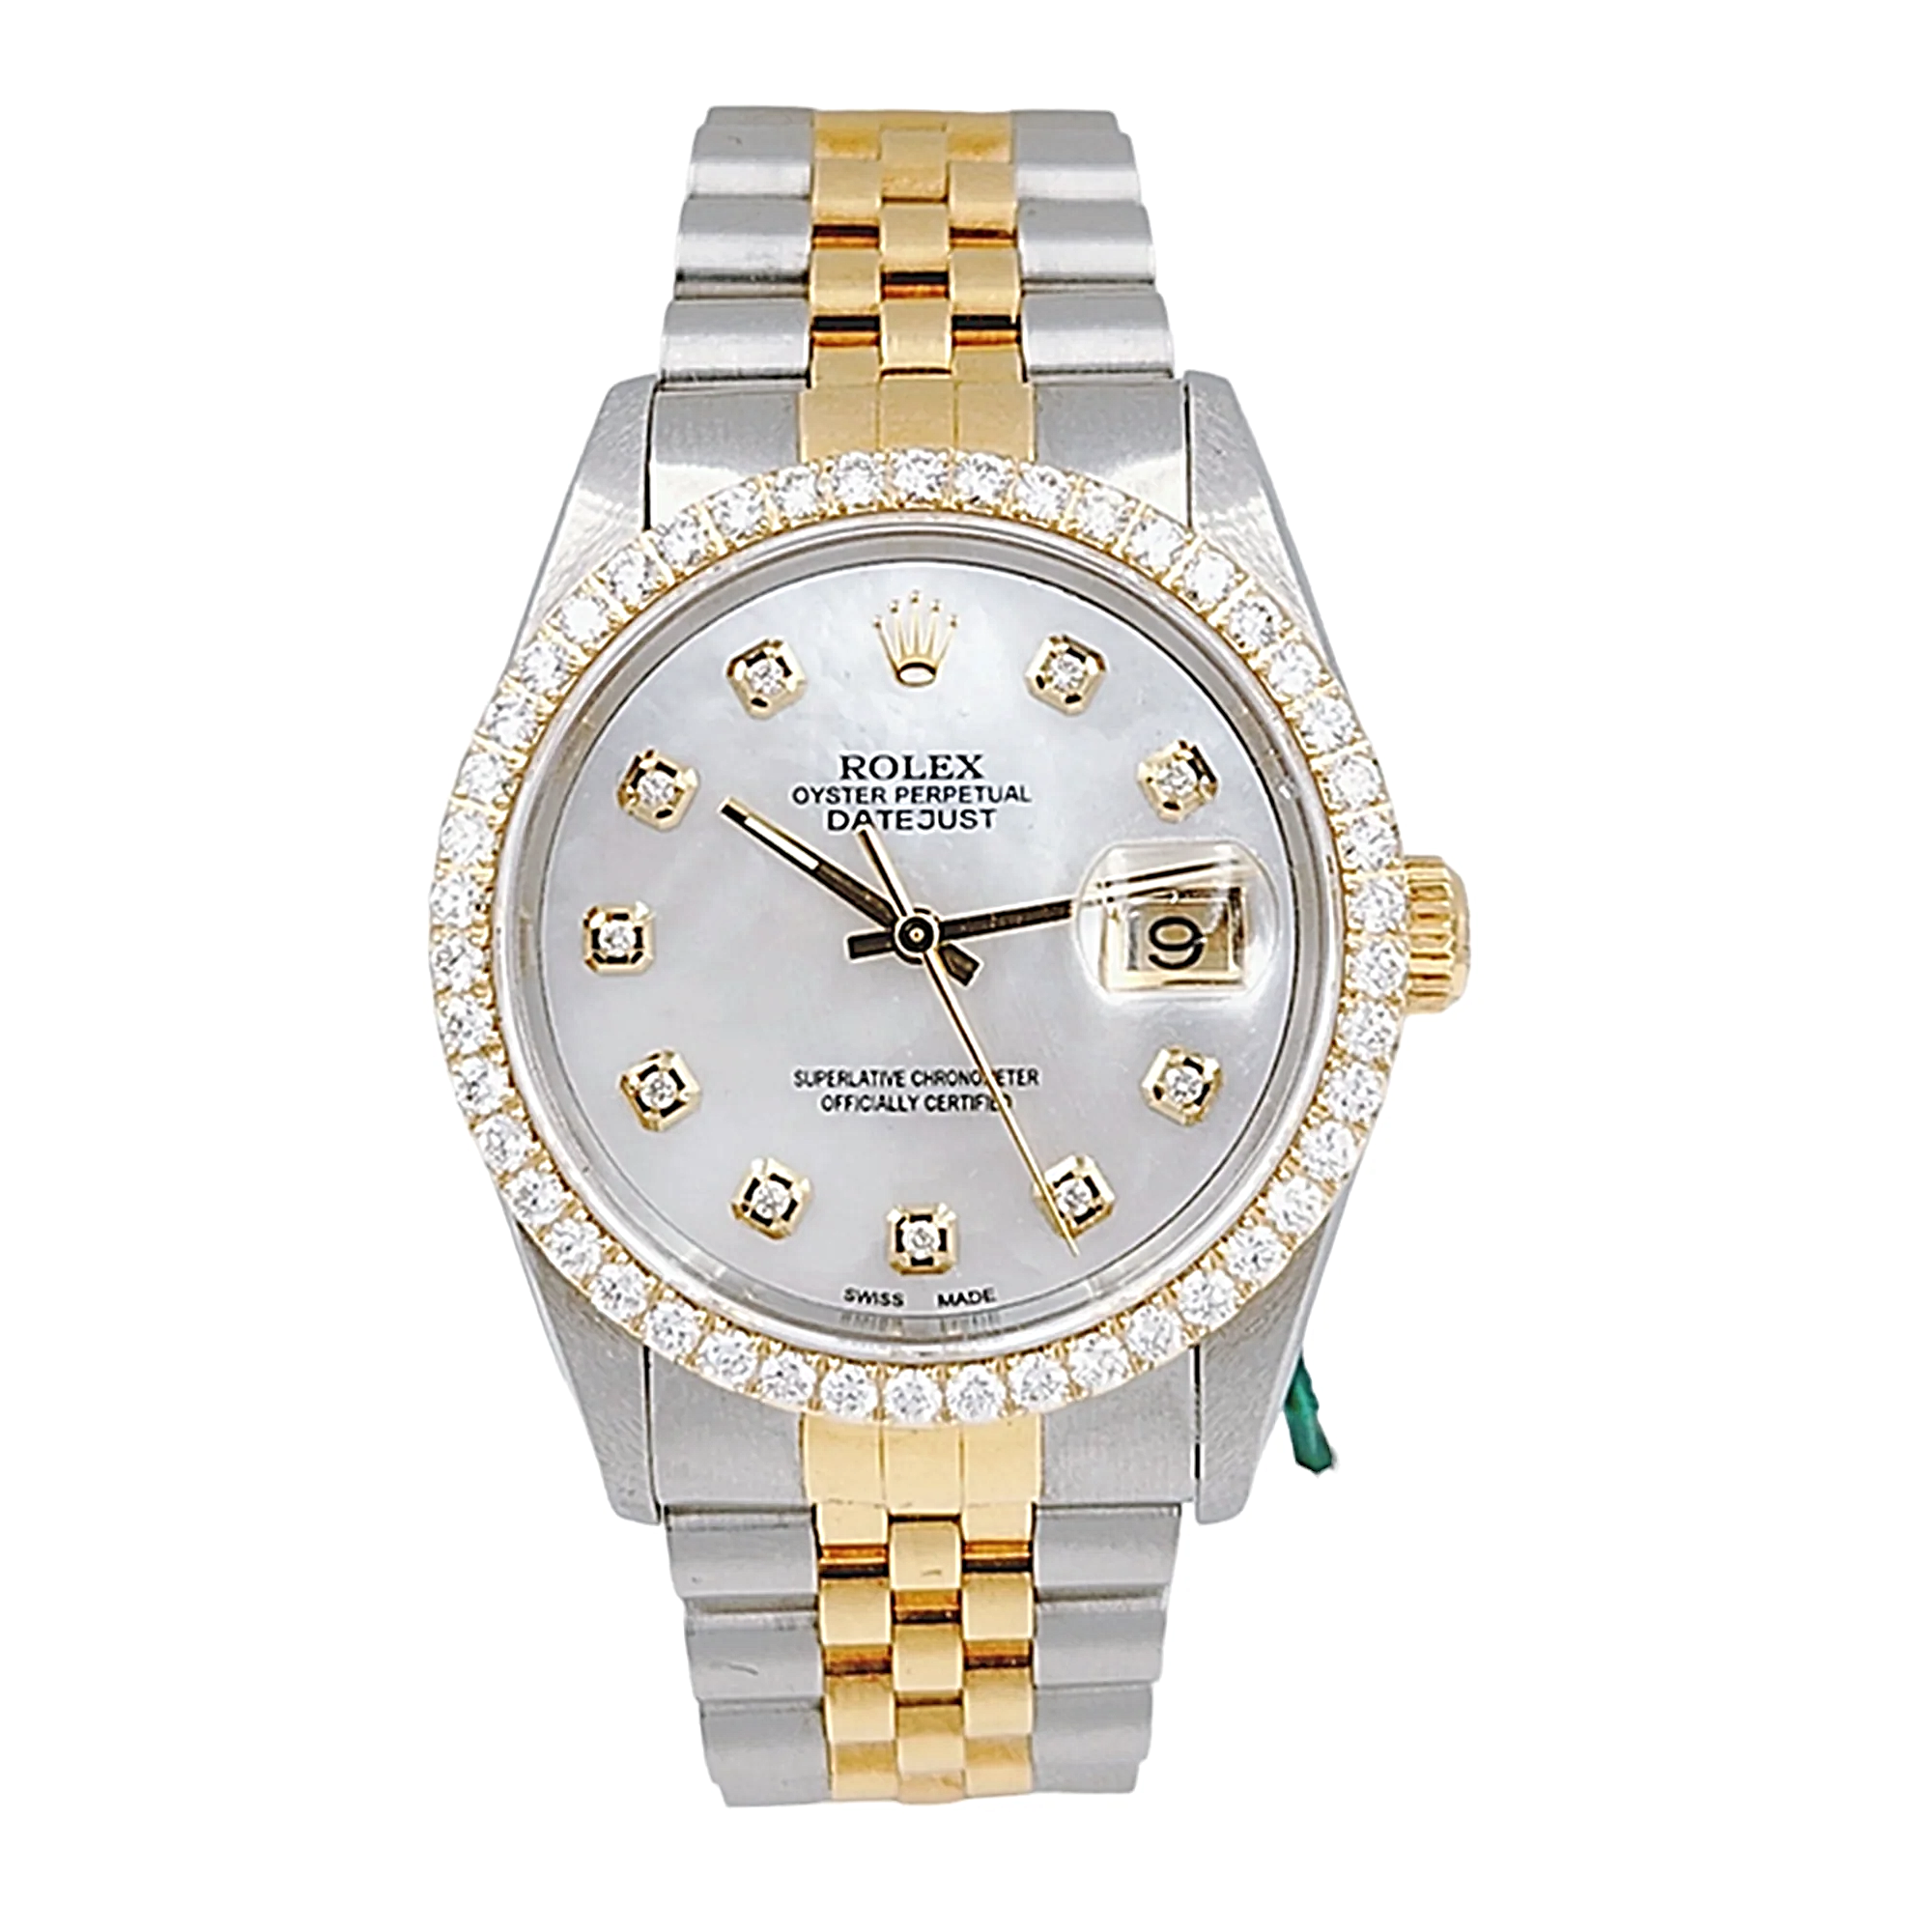 Men's Rolex 36mm DateJust 18K Gold / Stainless Steel Two Tone Wristwatch w/ Mother of Pearl Diamond Dial & Diamond Bezel. (Pre-Owned 16233)